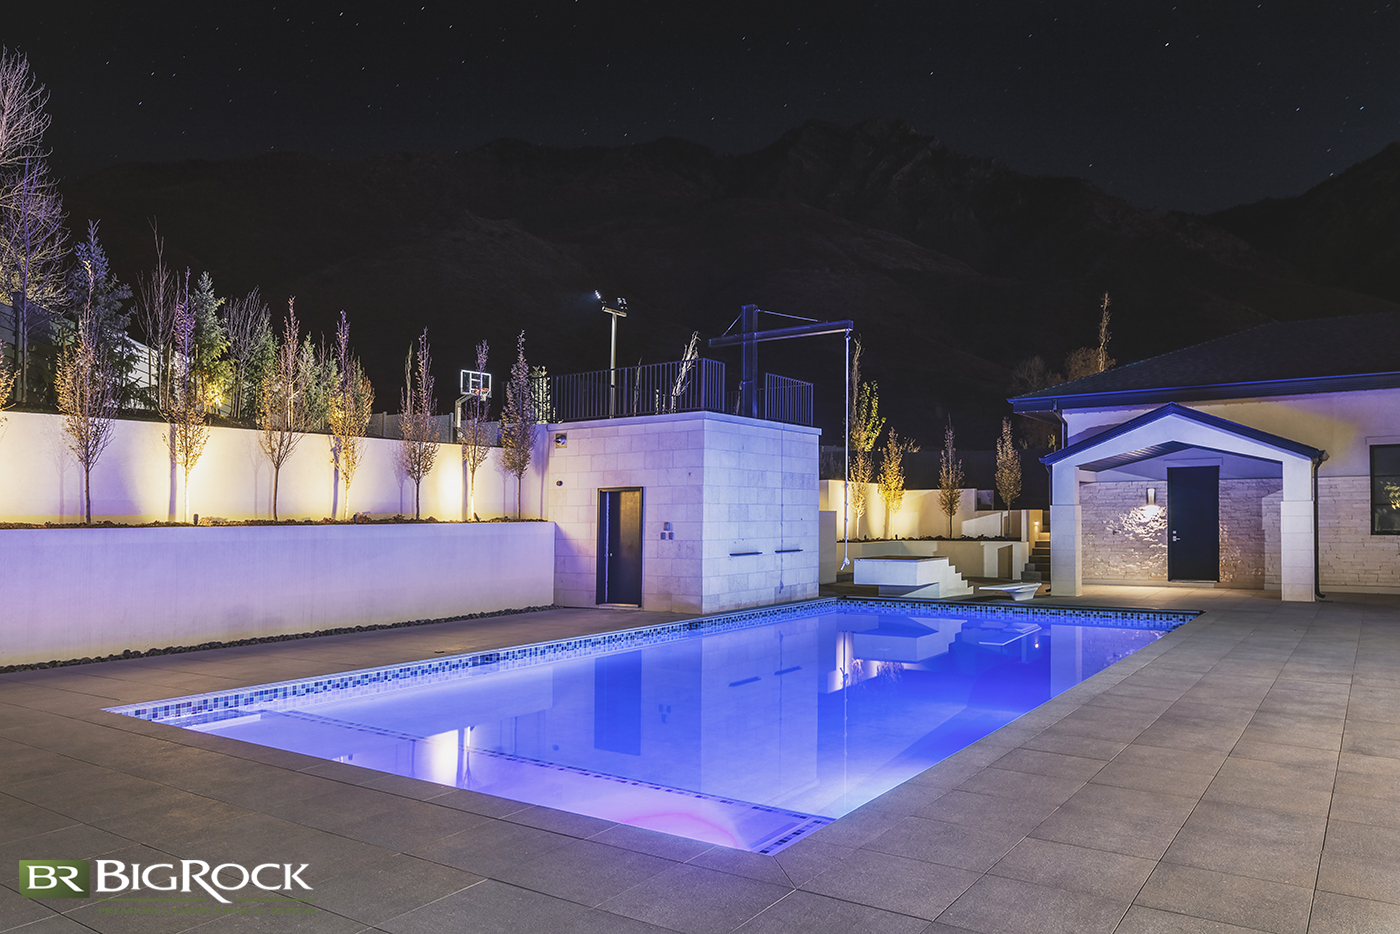 Light your backyard pool with perfectly designed pool lights and landscaping lights so you can enjoy your outdoor recreation any time of the day...or night!